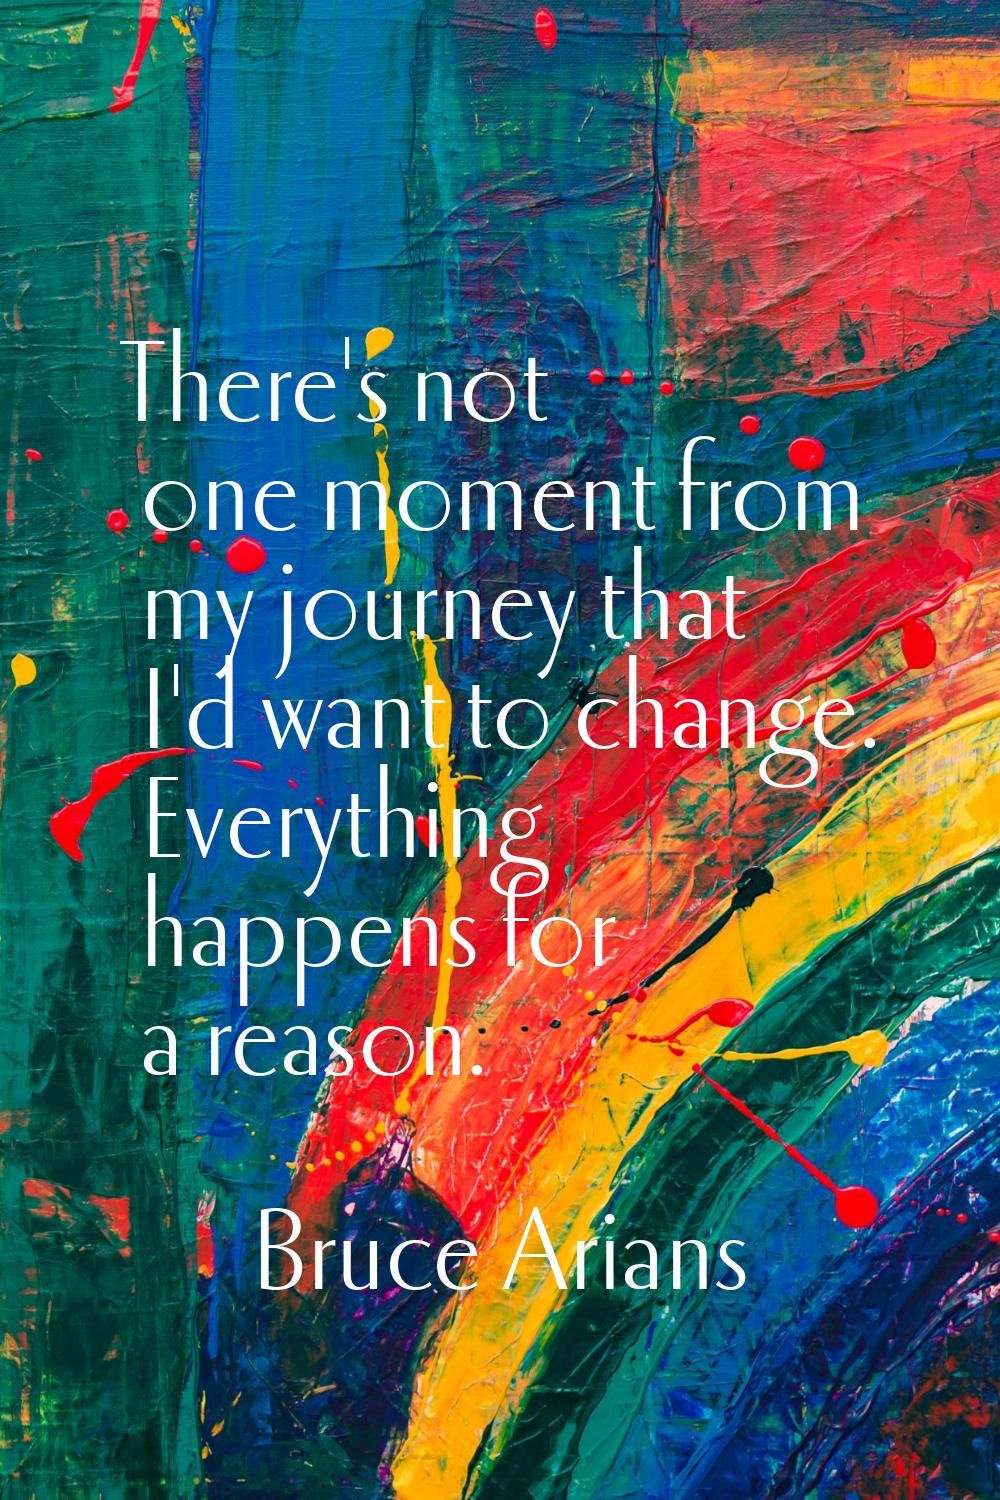 There's not one moment from my journey that I'd want to change. Everything happens for a reason.